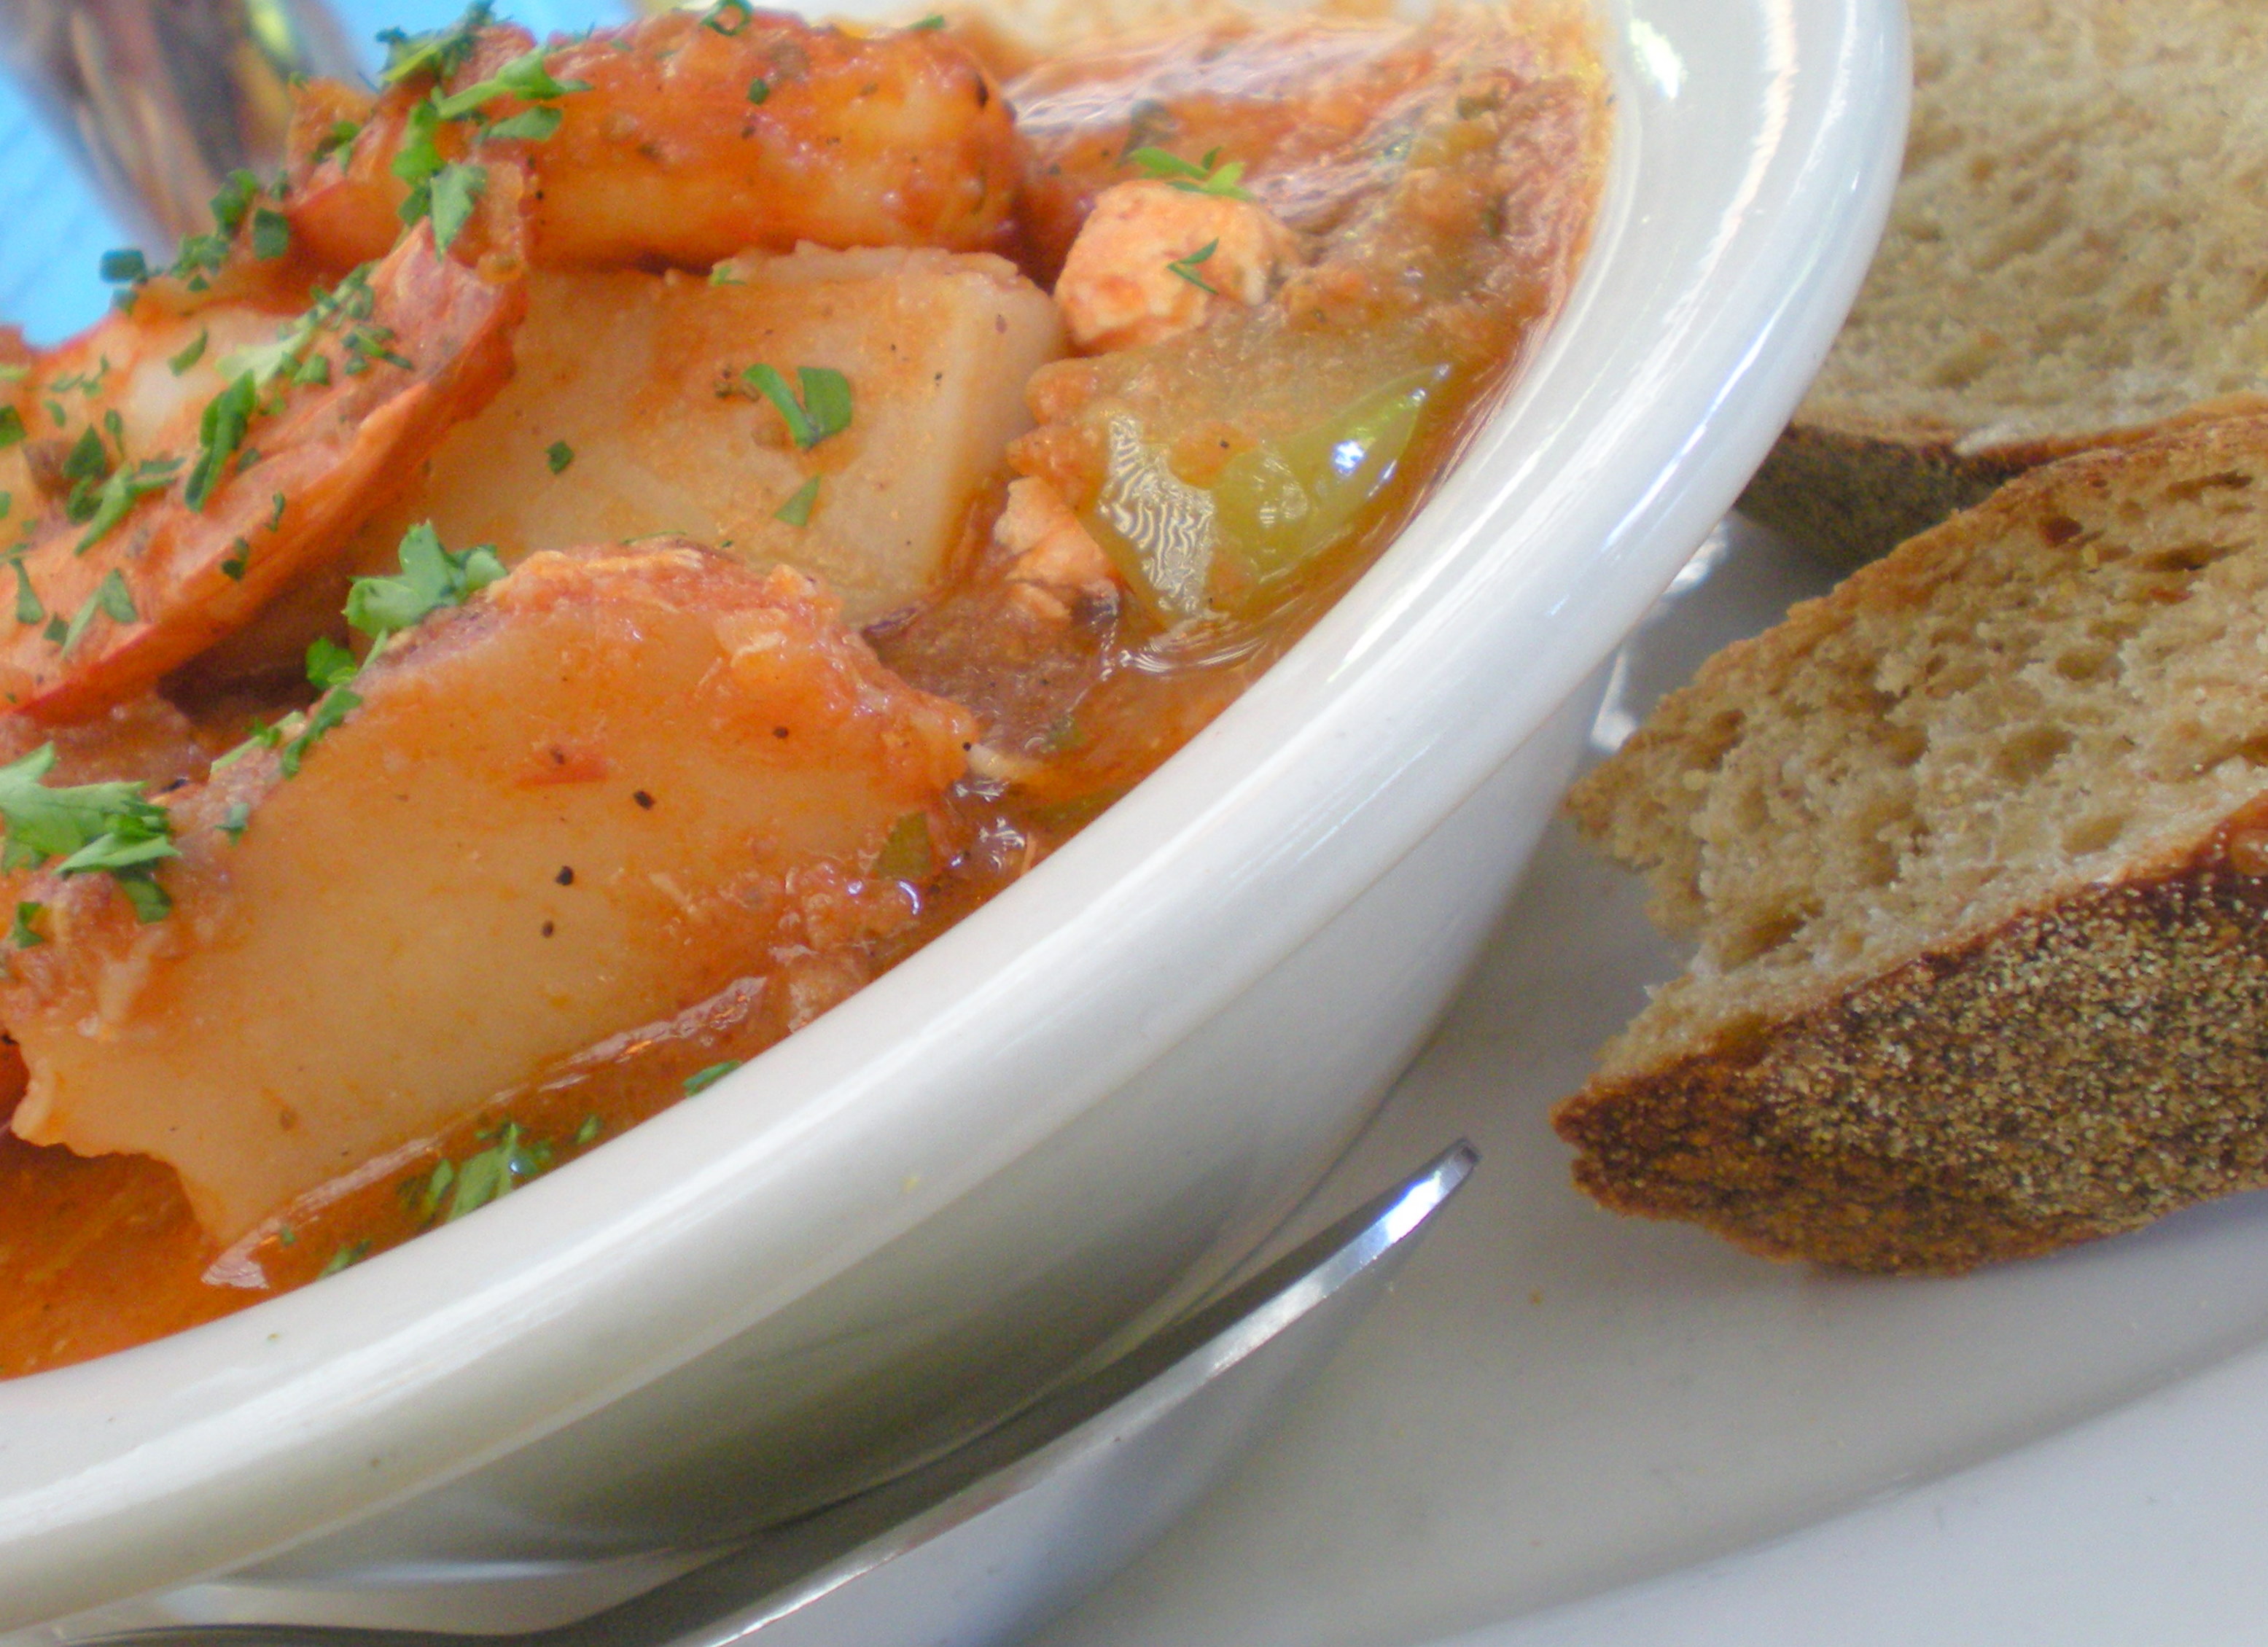 Fresh Seafood Rgout: Salmon, shrimp simmered with herbs, saffron and citrus served with toasted baguette slices